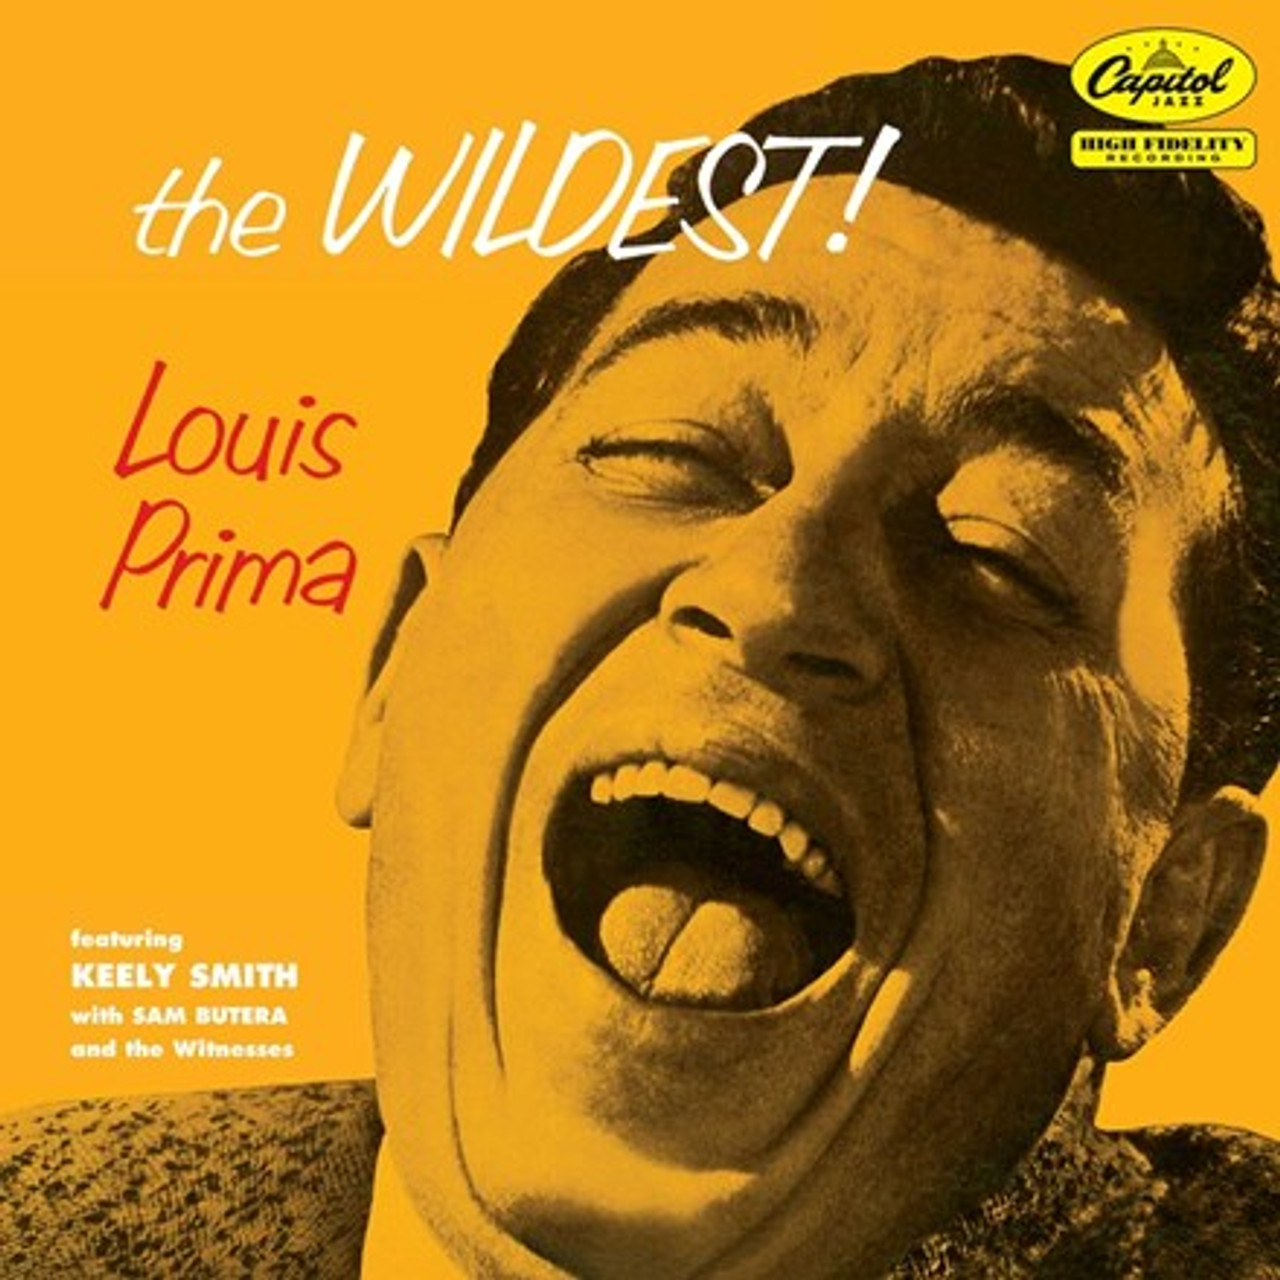 Louis Prima featuring Keely Smith, Sam Butera and The Witnesses - The  Wildest! (Vinyl LP)